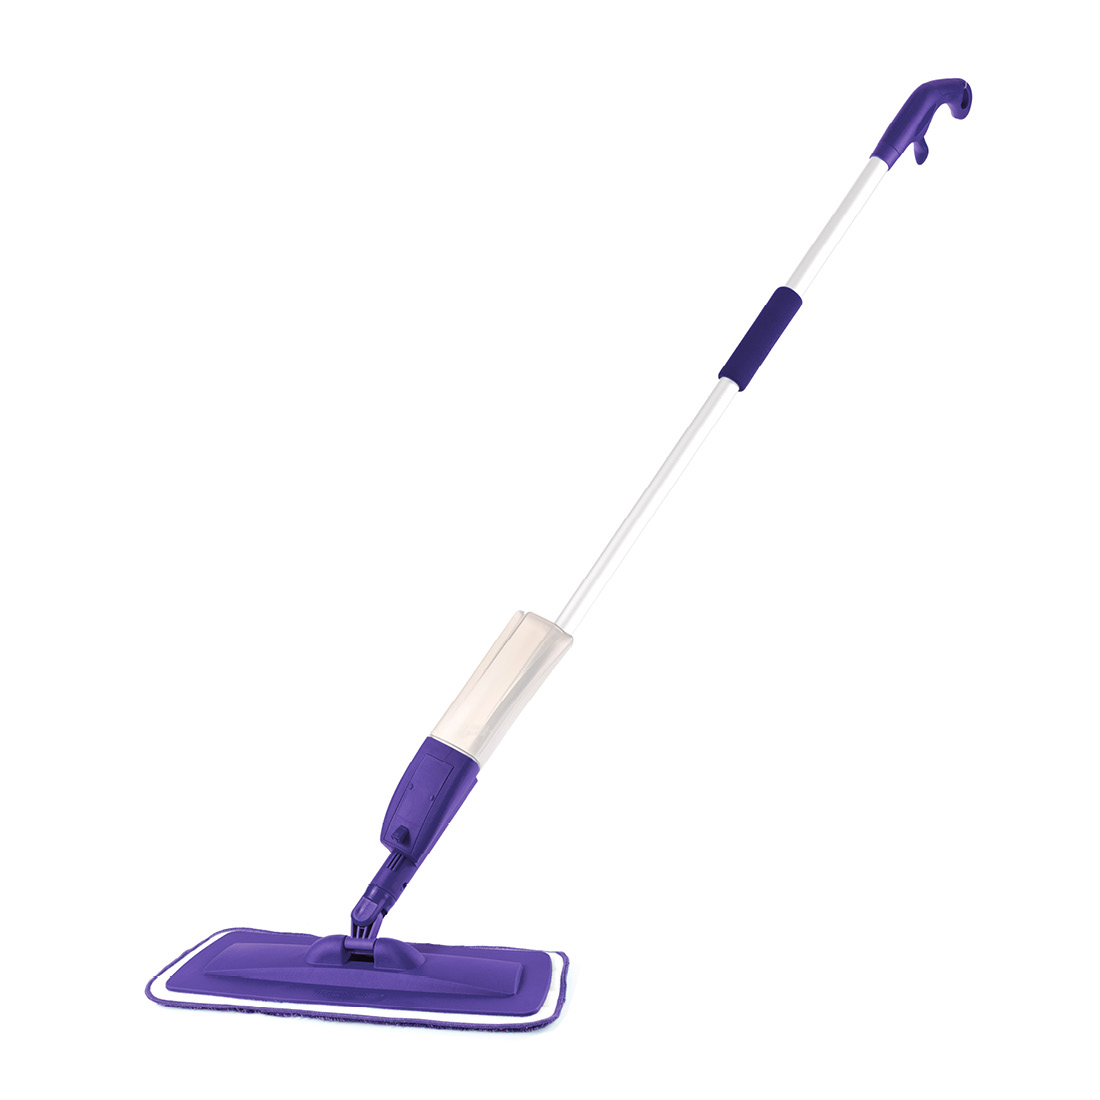 View Rovus Spray Mop with Microfibre Pad information